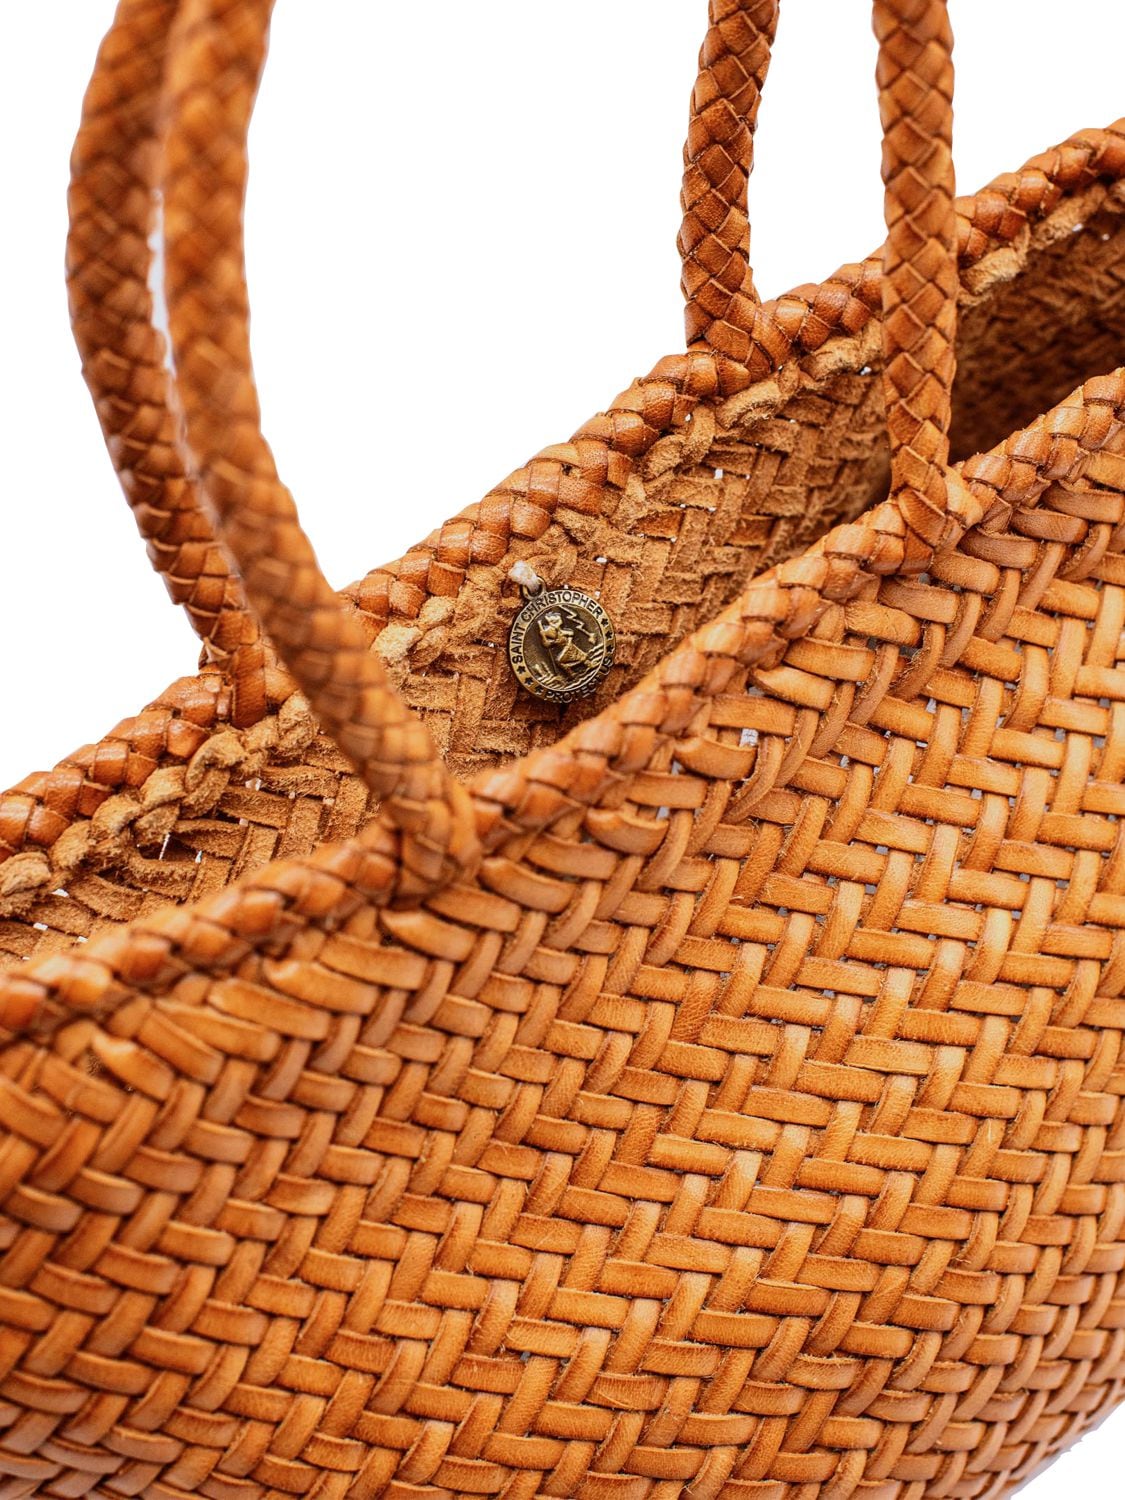 Shop Dragon Diffusion Grace Small Woven Leather Basket Bag In British Tan